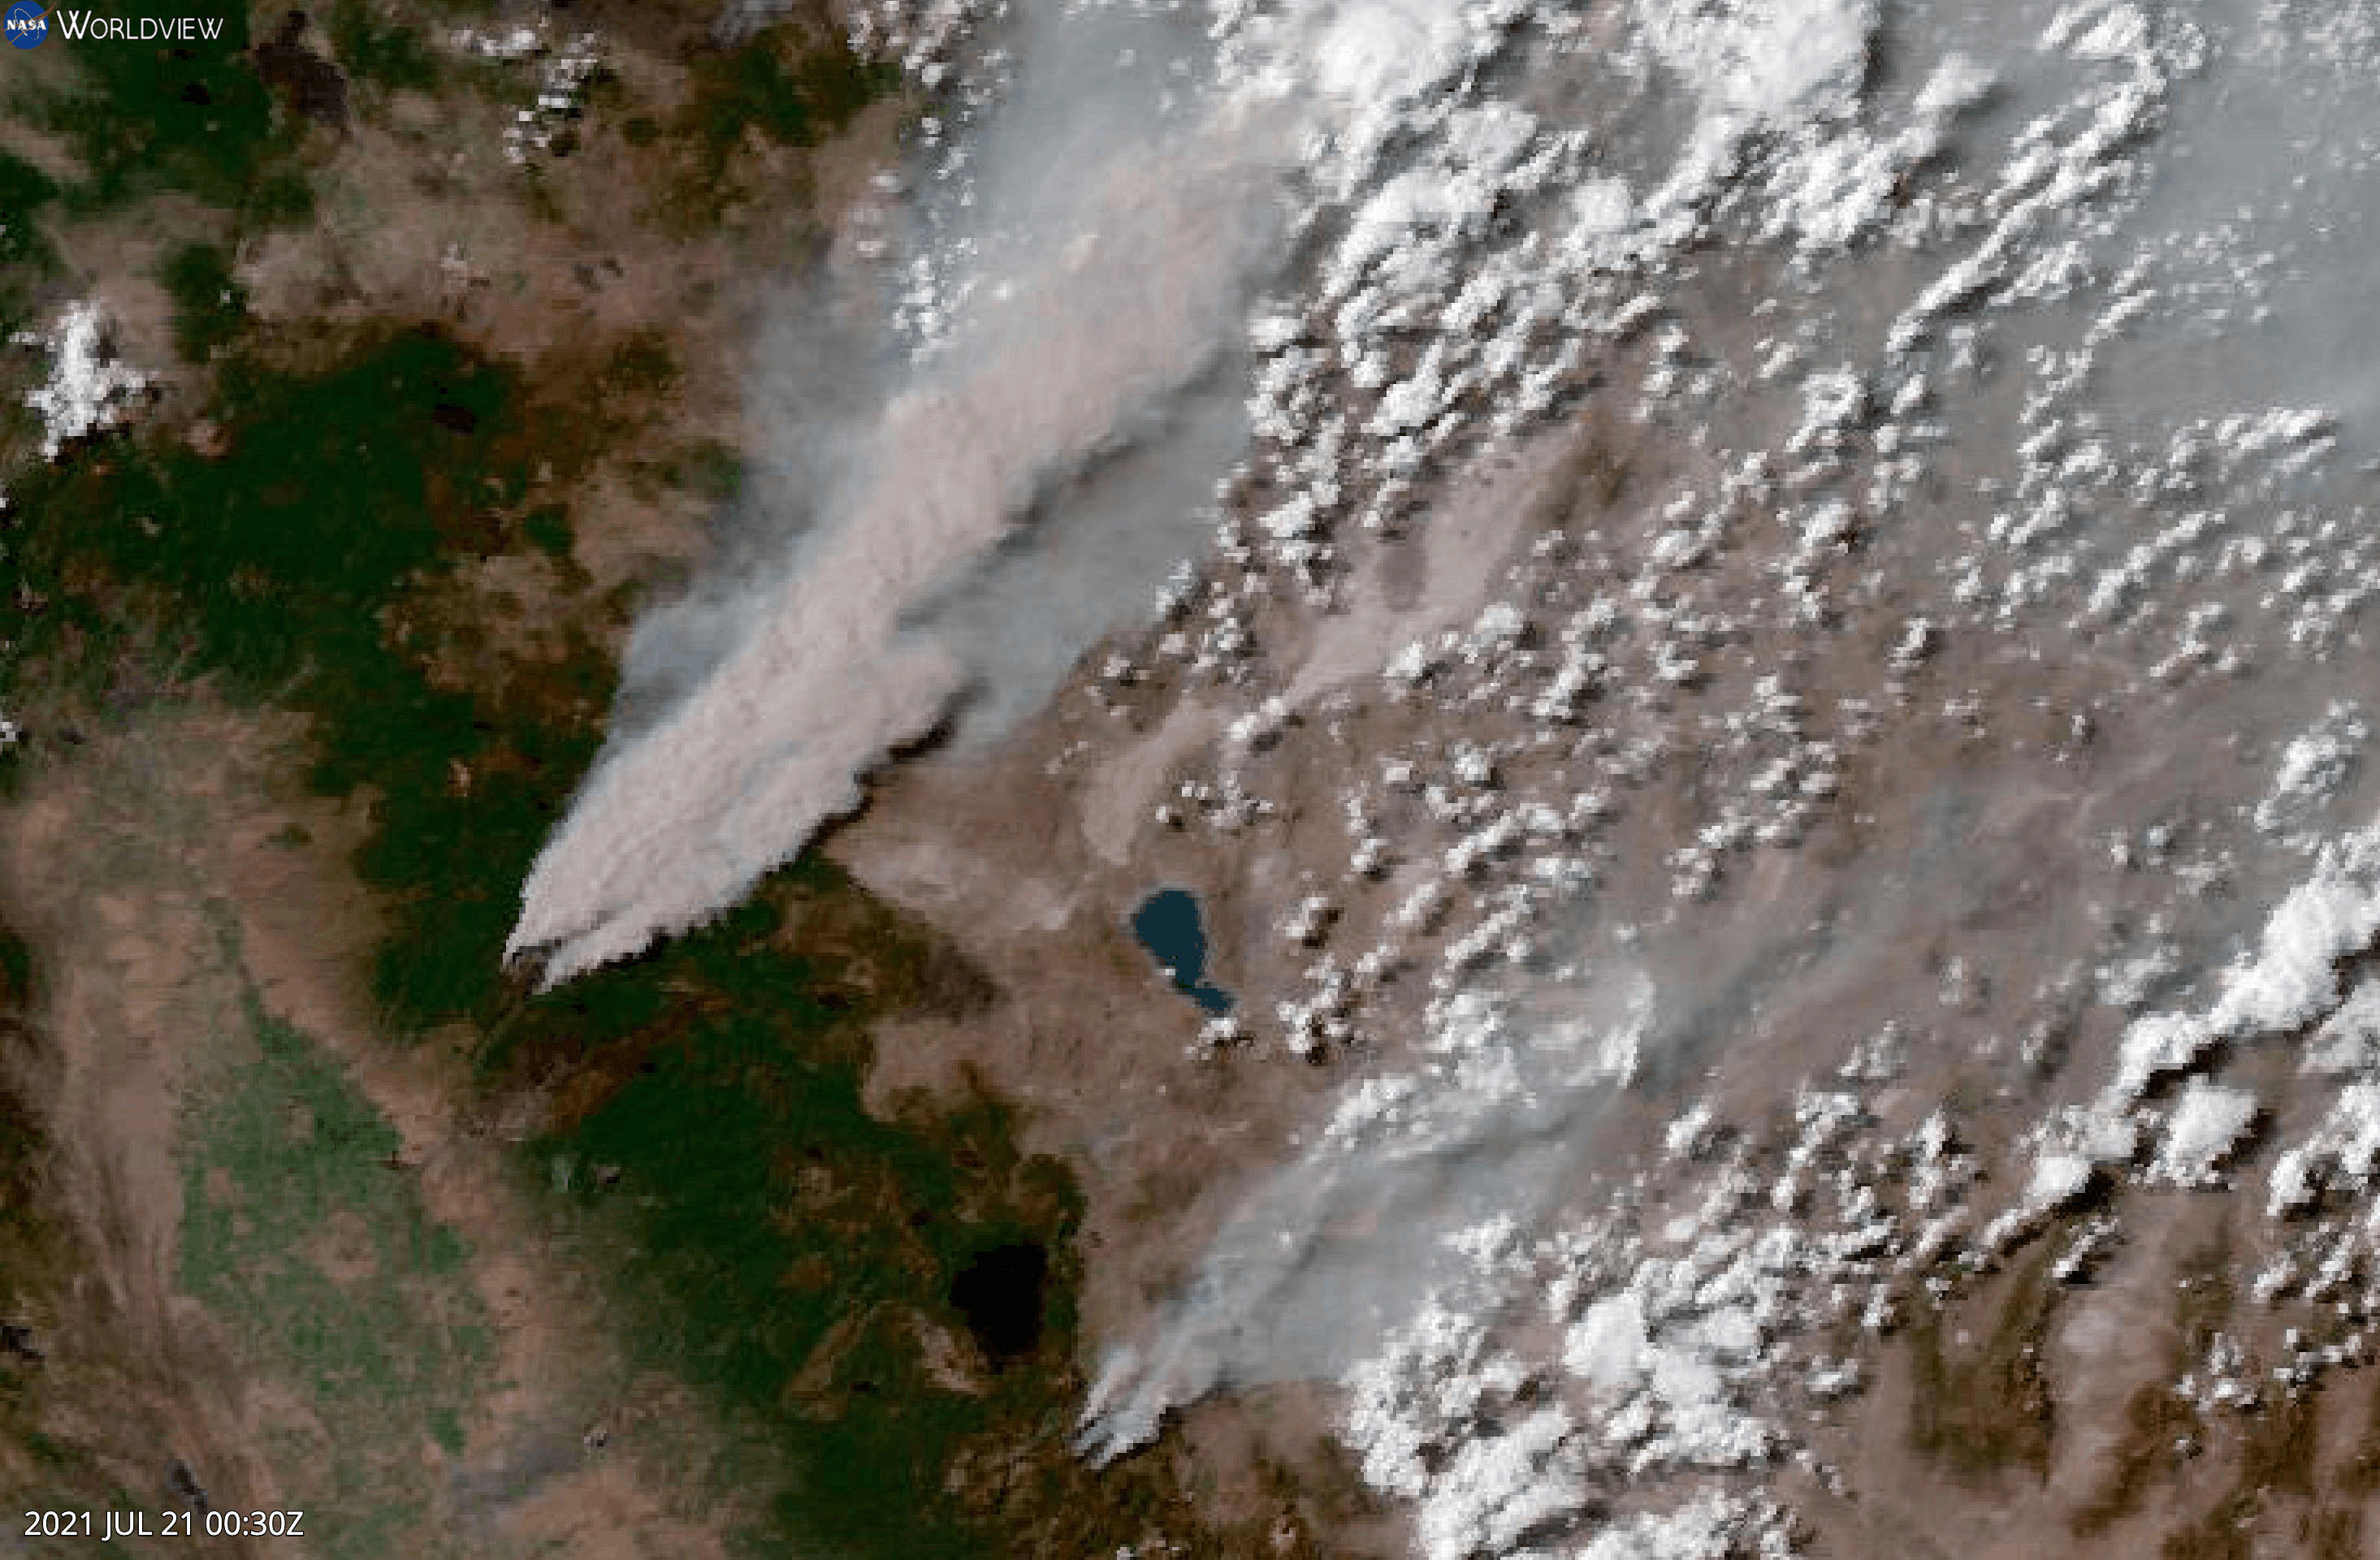 Satellite images show smoke plumes from wildfires.